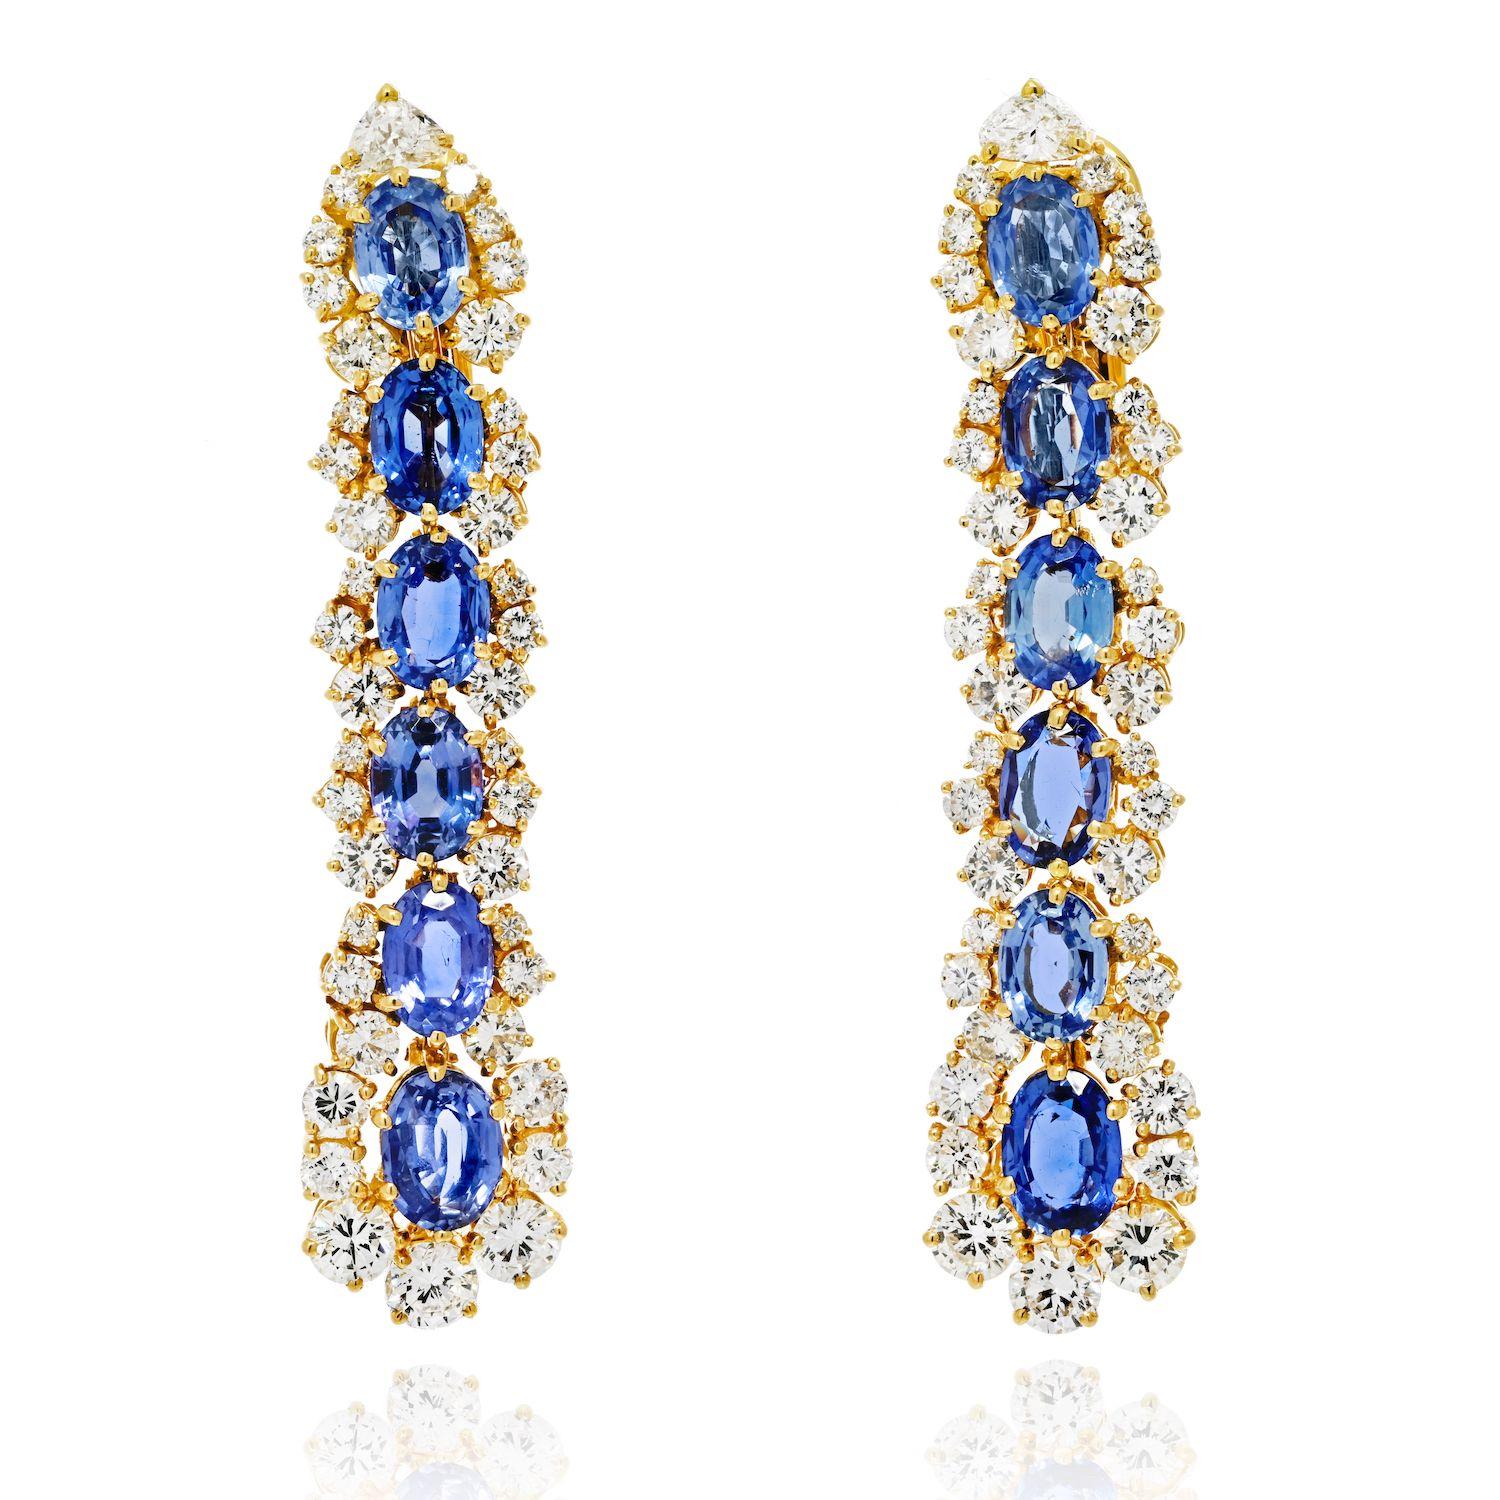 Marina B. 18k Yellow Gold Diamond and Sapphire Dangling Drop Earrings In Excellent Condition For Sale In New York, NY